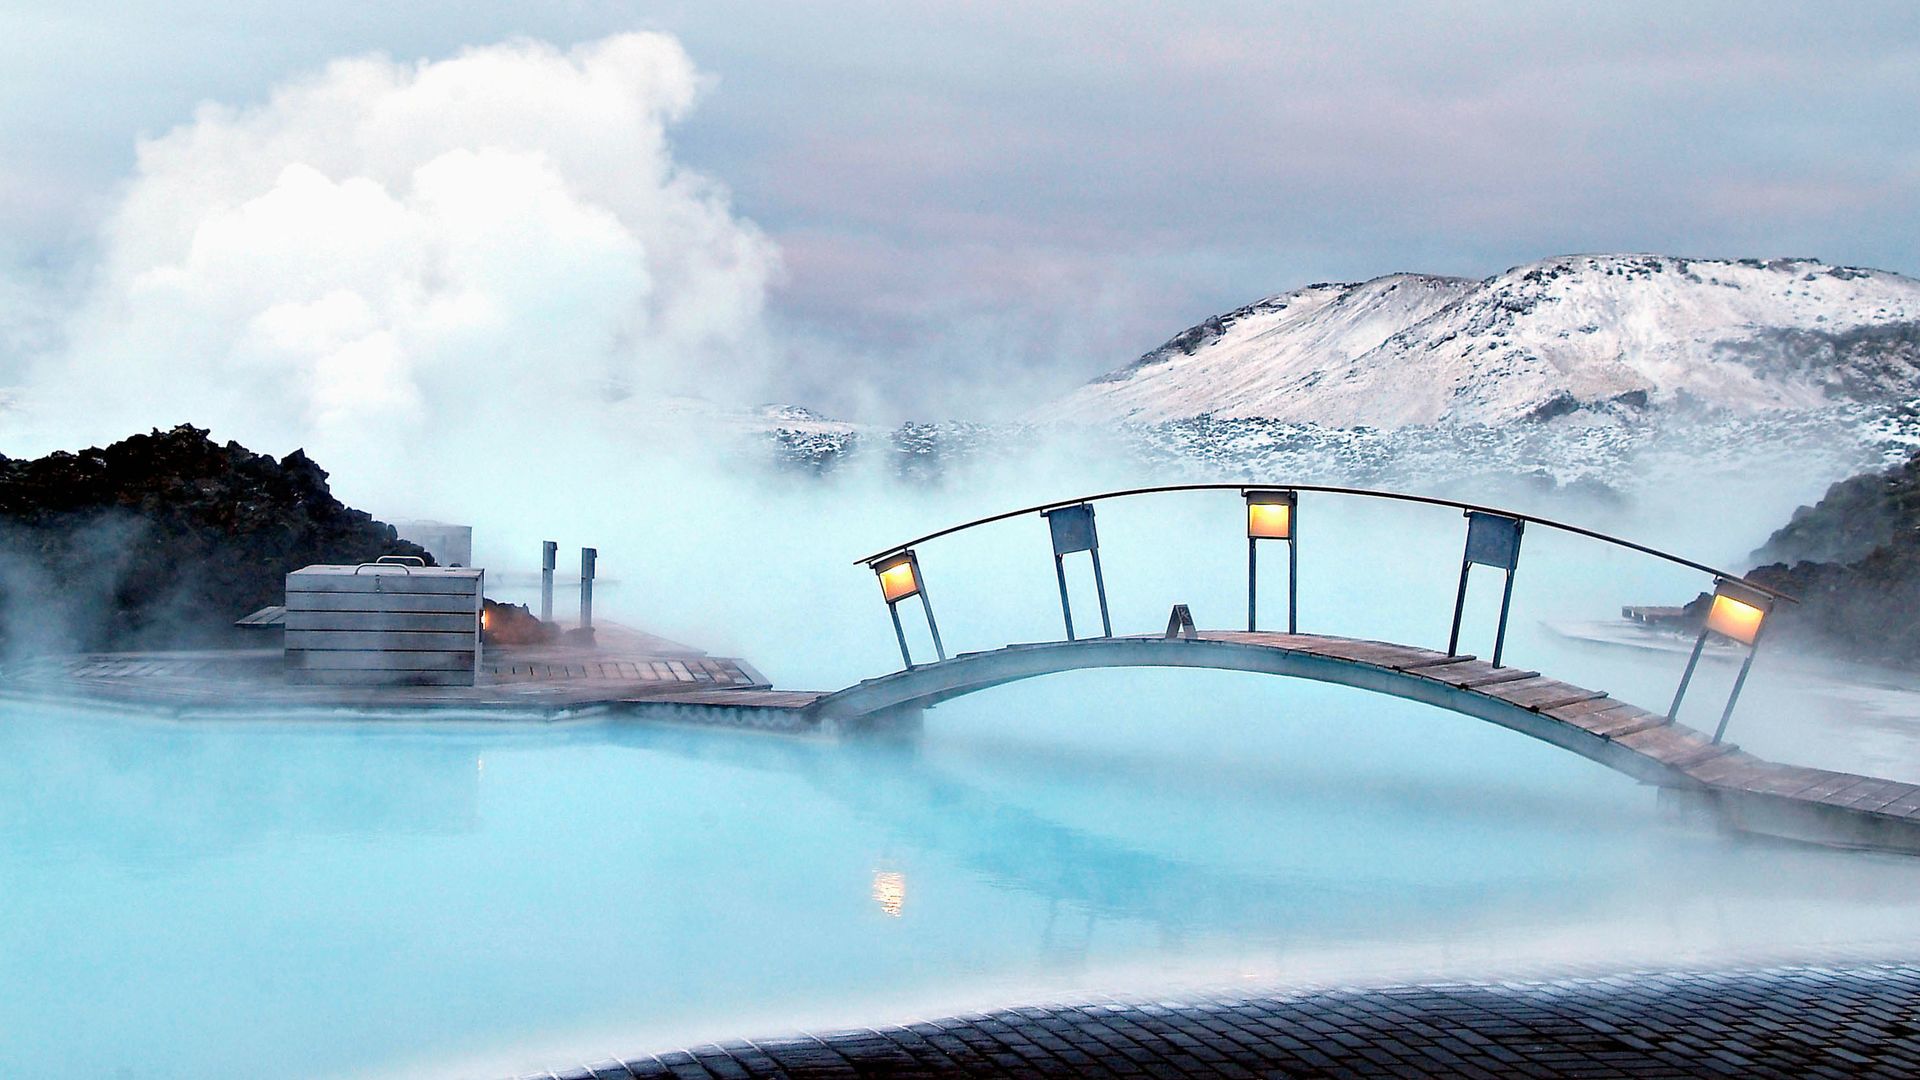 Blue Lagoon in winter, Iceland